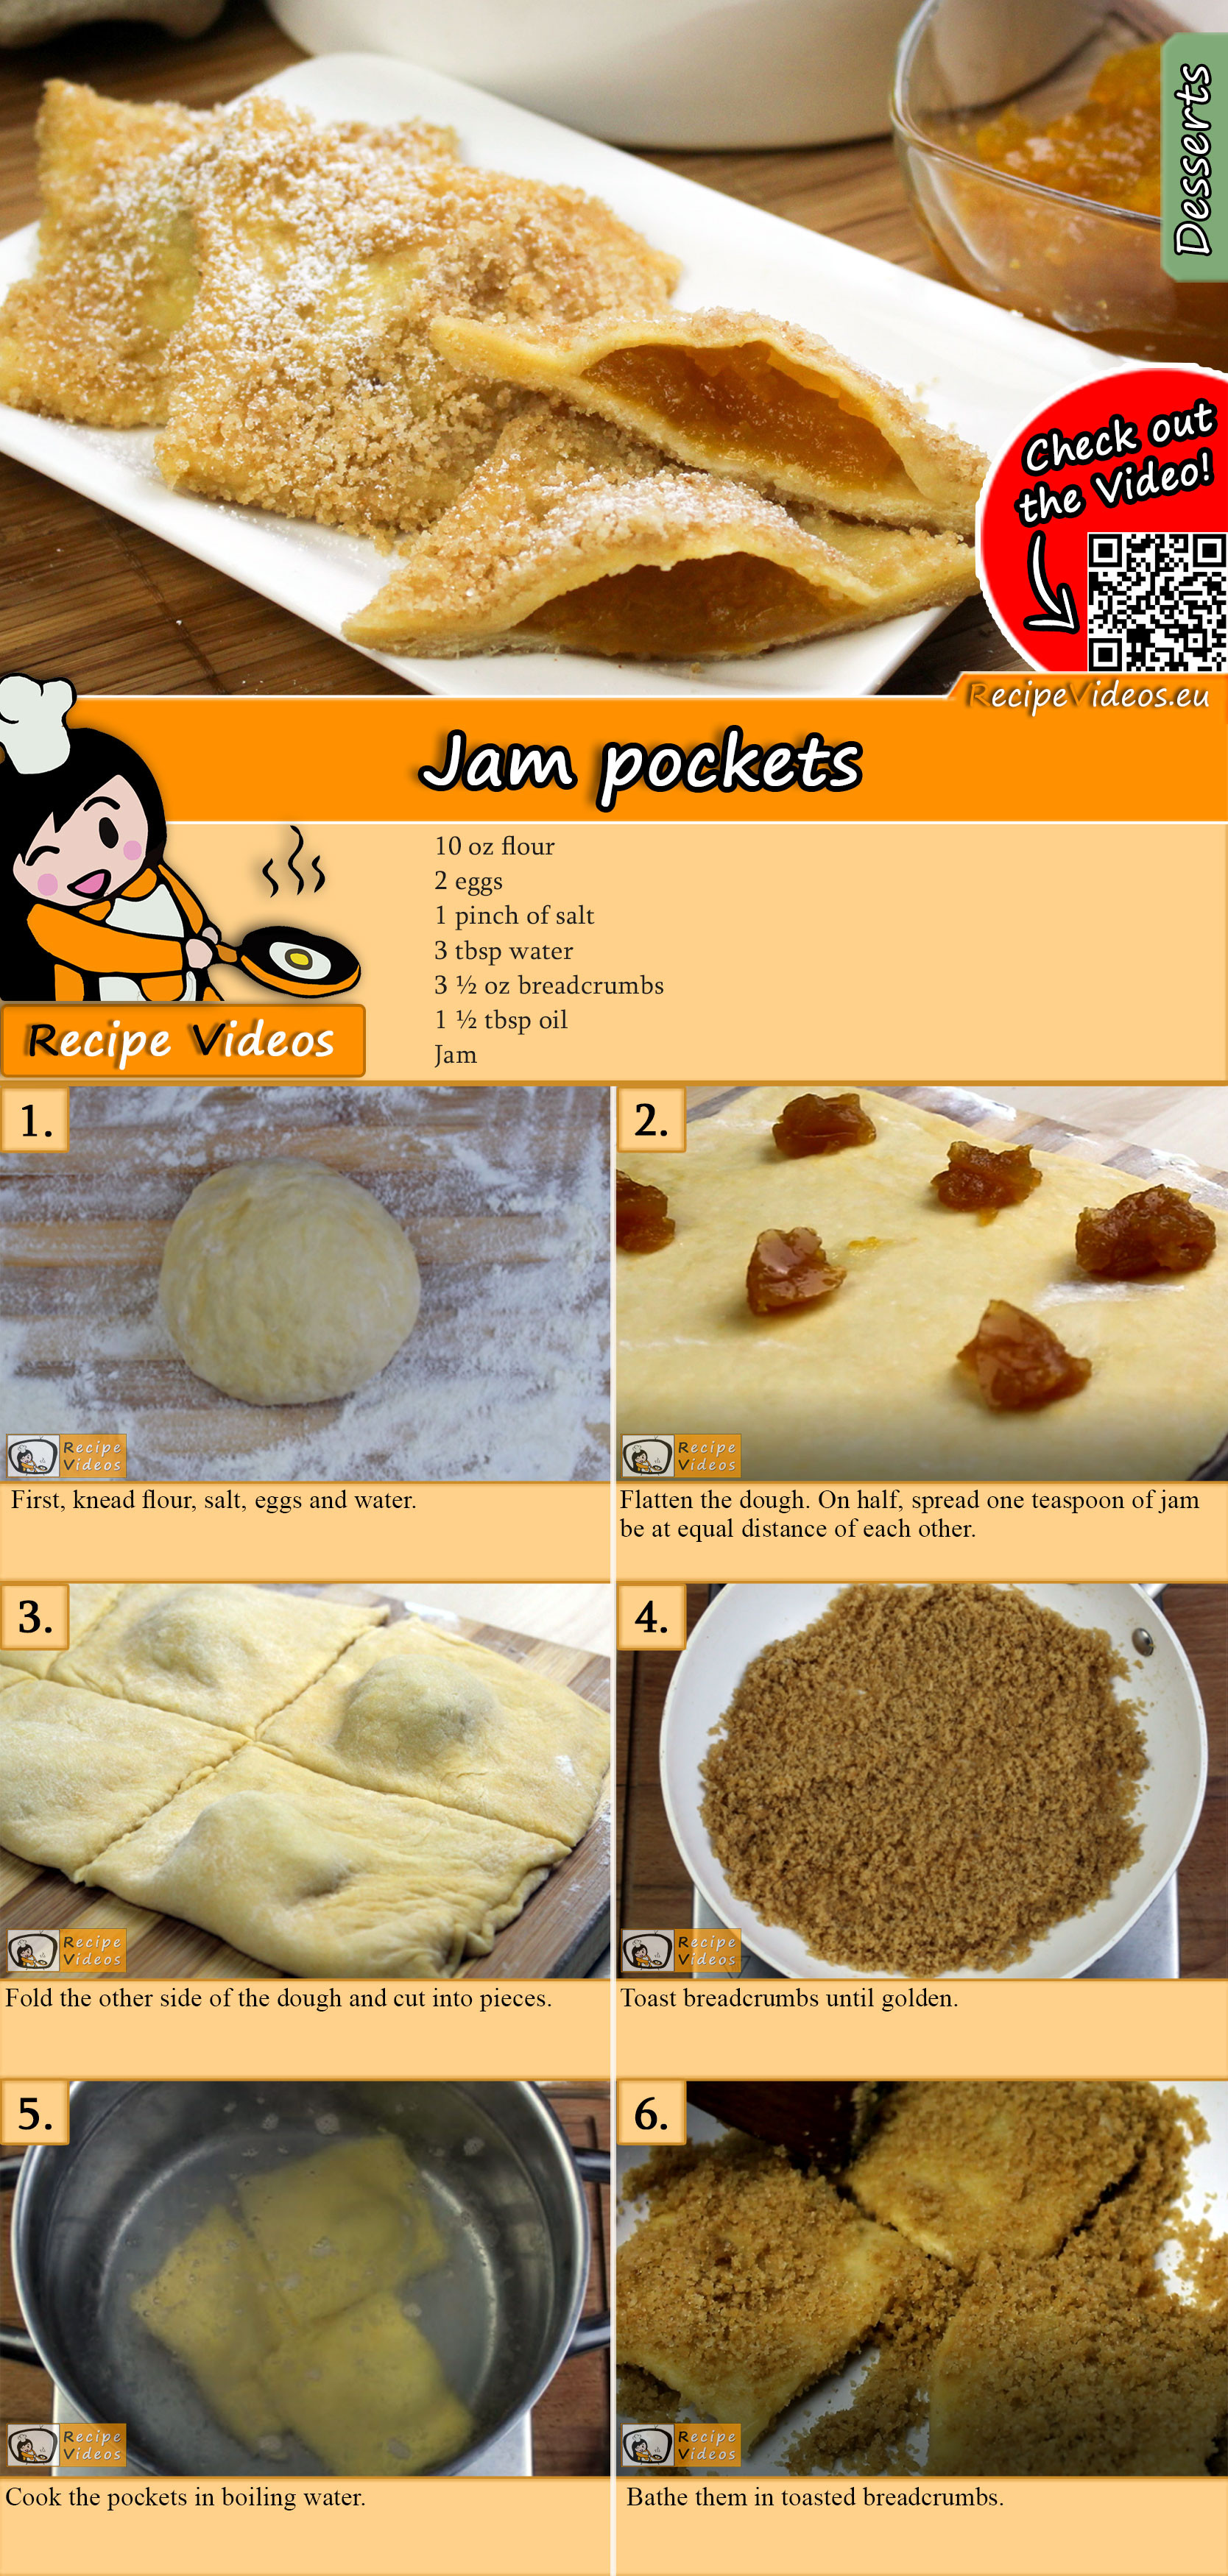 Jam pockets recipe with video